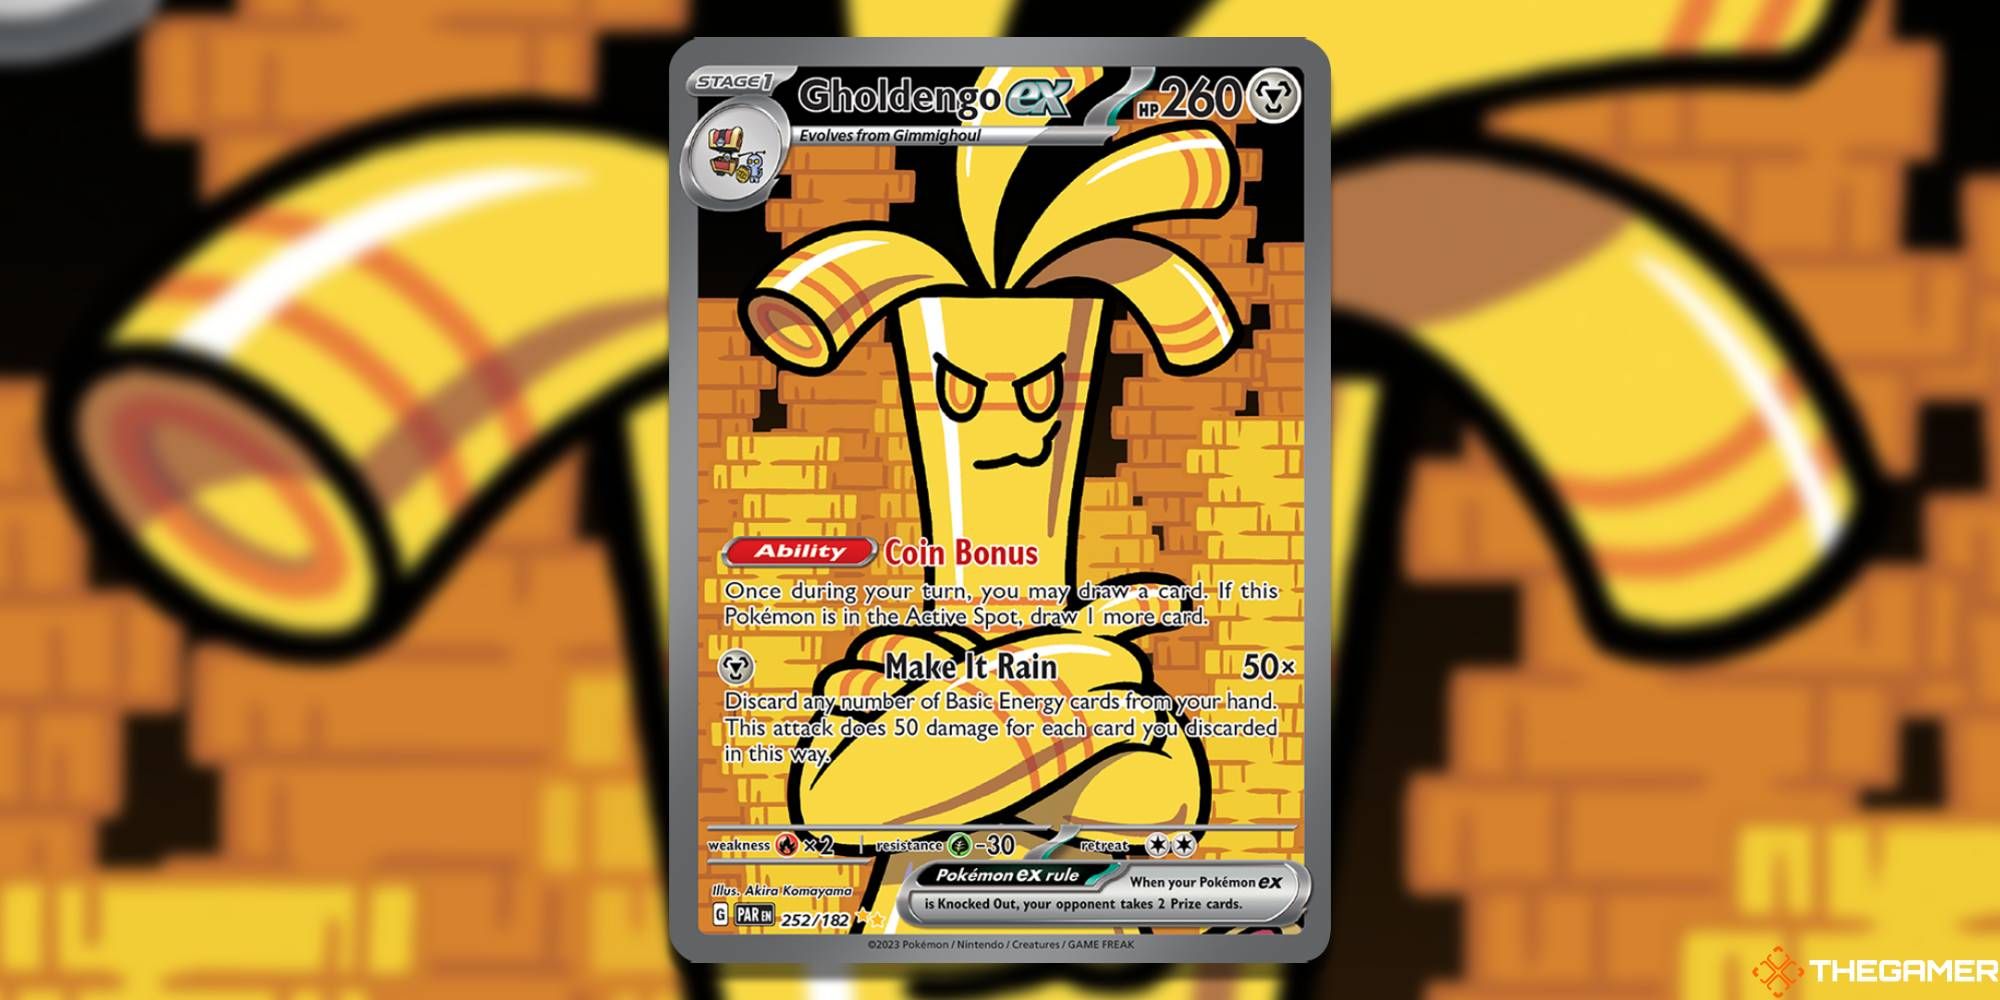 Image of the card Gholdengo ex in Pokemon TCG, with art by Akira Komayama